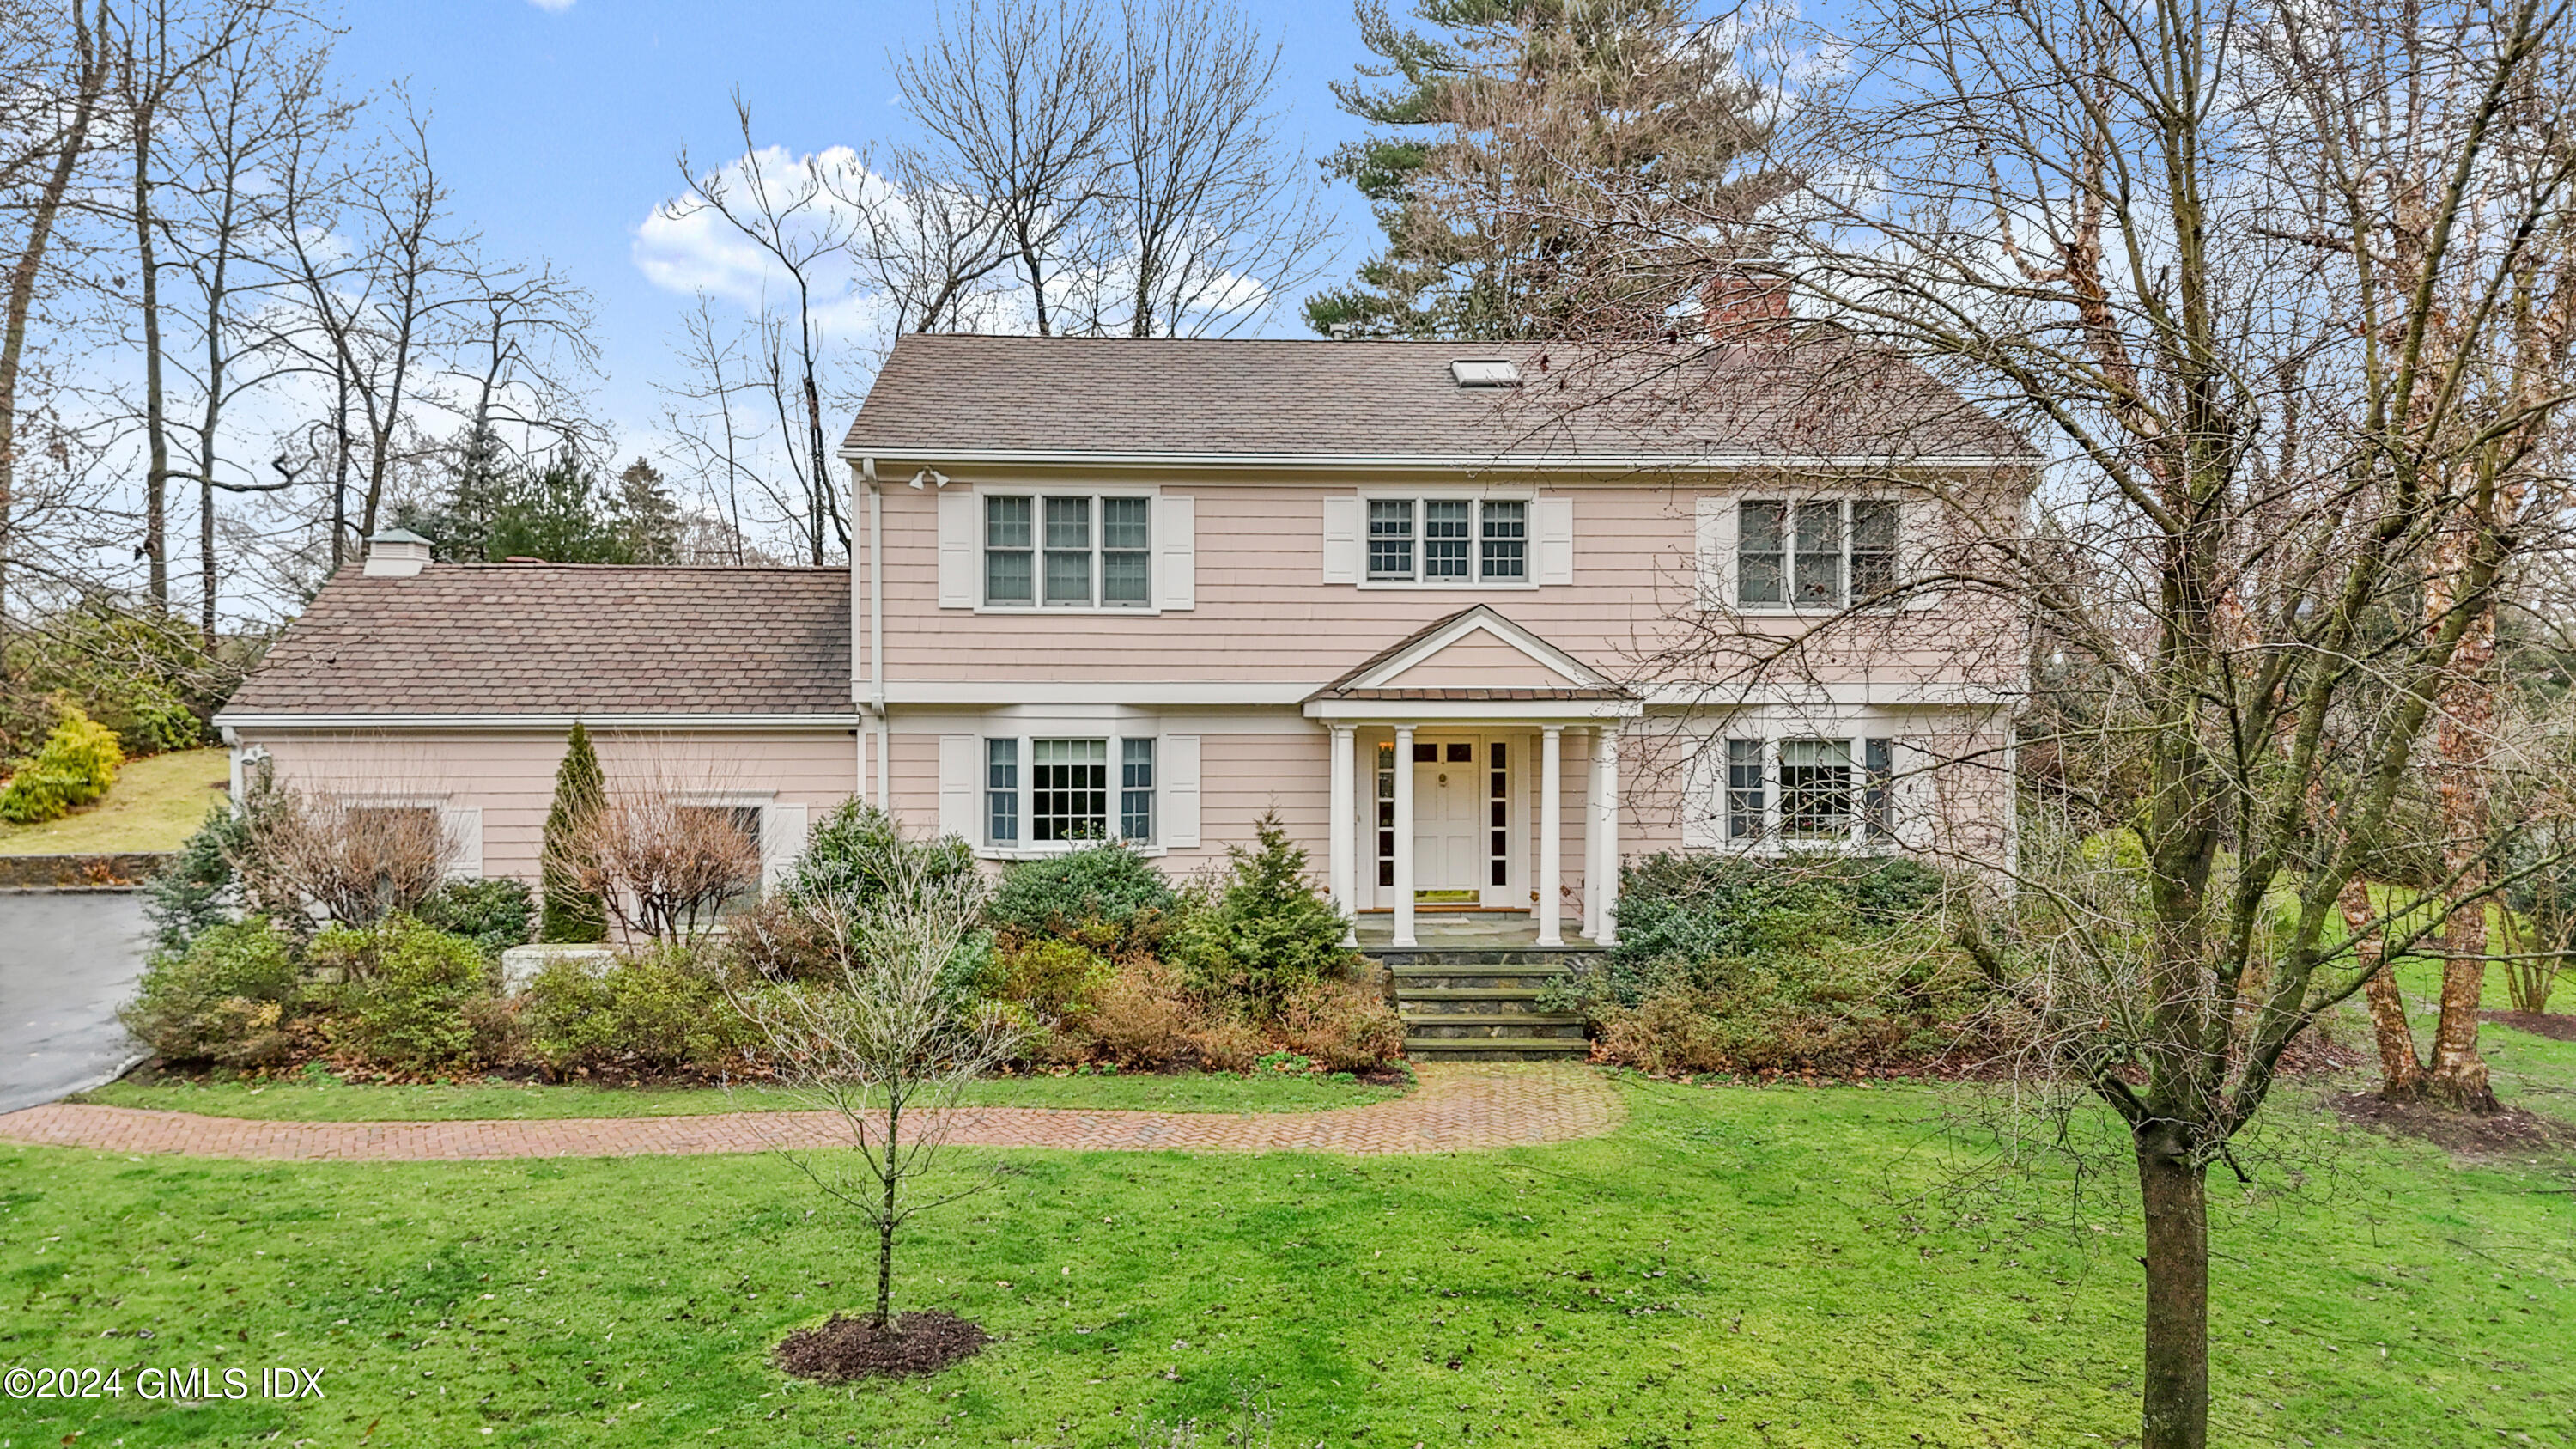 21 Stanwich Road, Greenwich, Connecticut - 4 Bedrooms  
4 Bathrooms - 